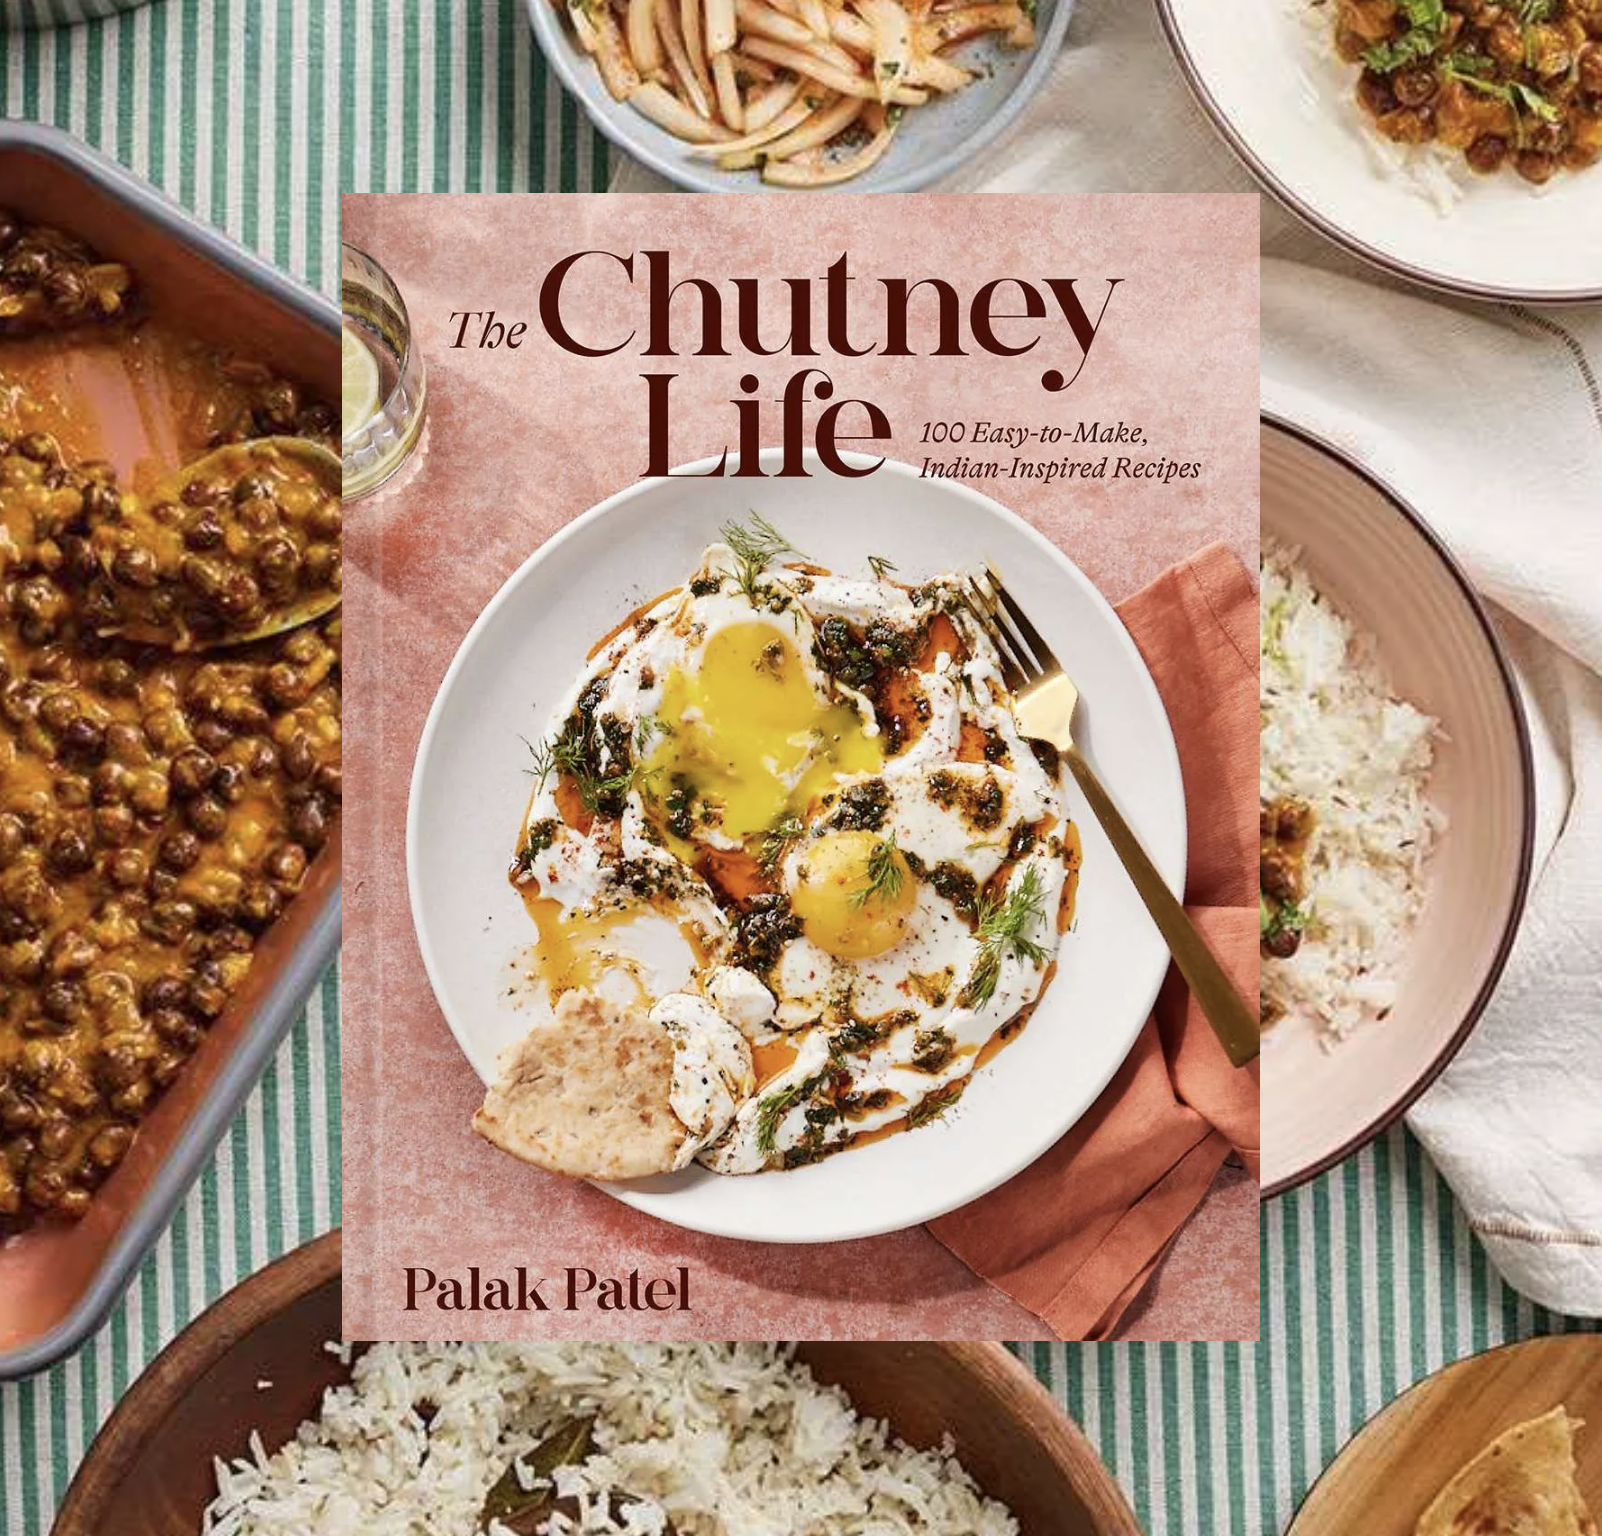 Cover of The Chutney Life on top of bowls of food